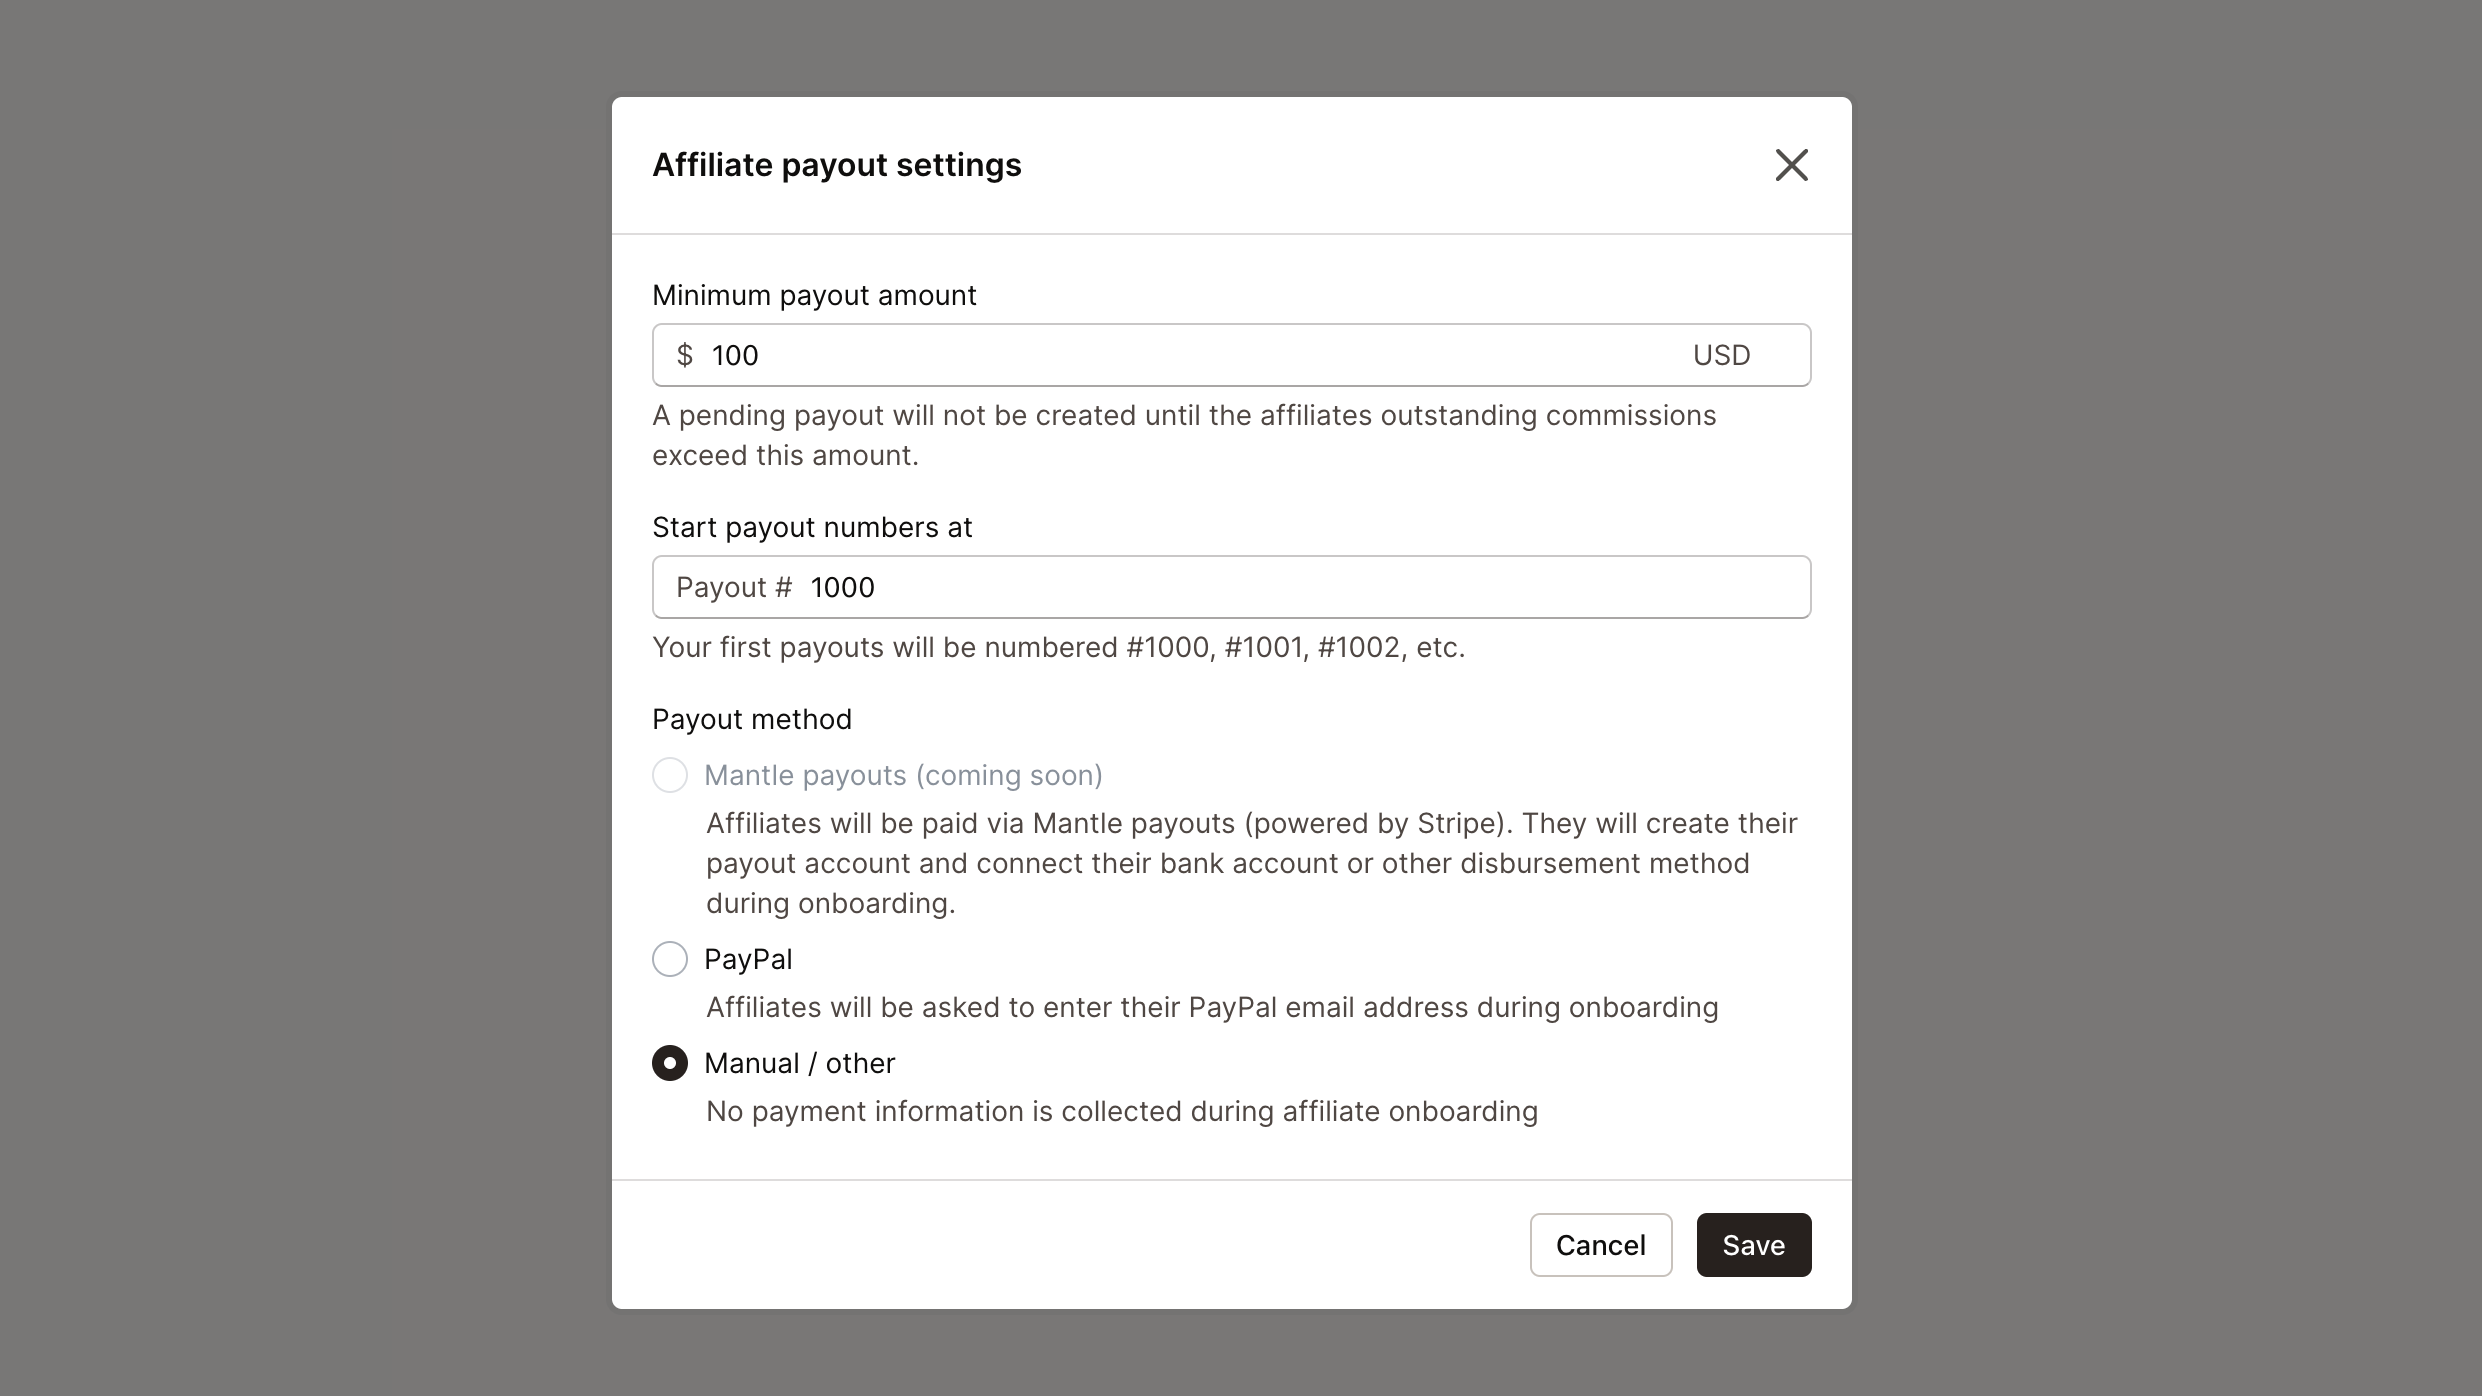 Affiliate payouts settings